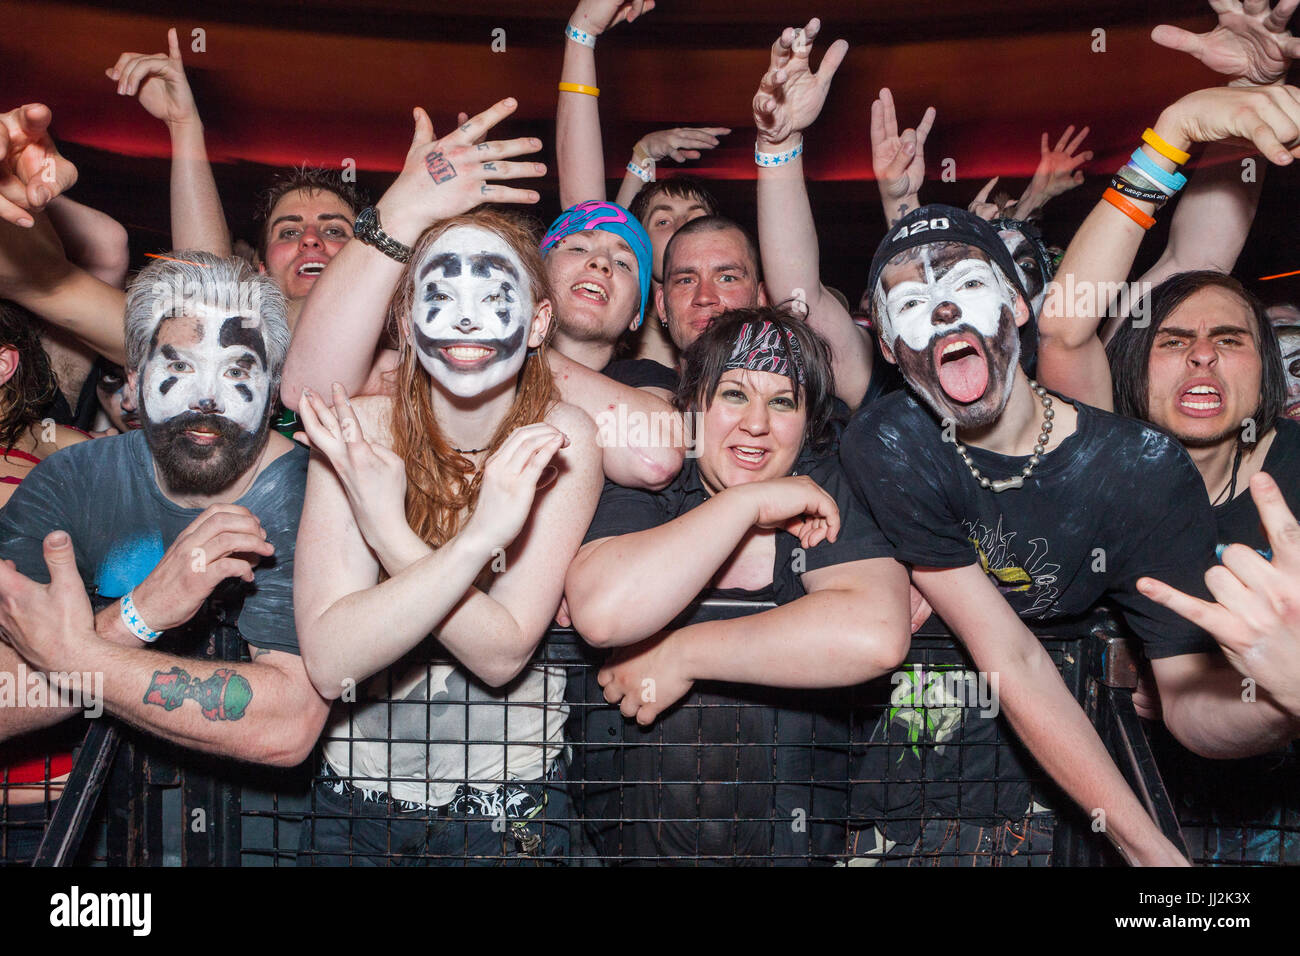 Juggalos (Insane Clown Posse fans) at an ICP concert at the Eagle/Rave club  in Milwaukee, Wisconsin Stock Photo - Alamy